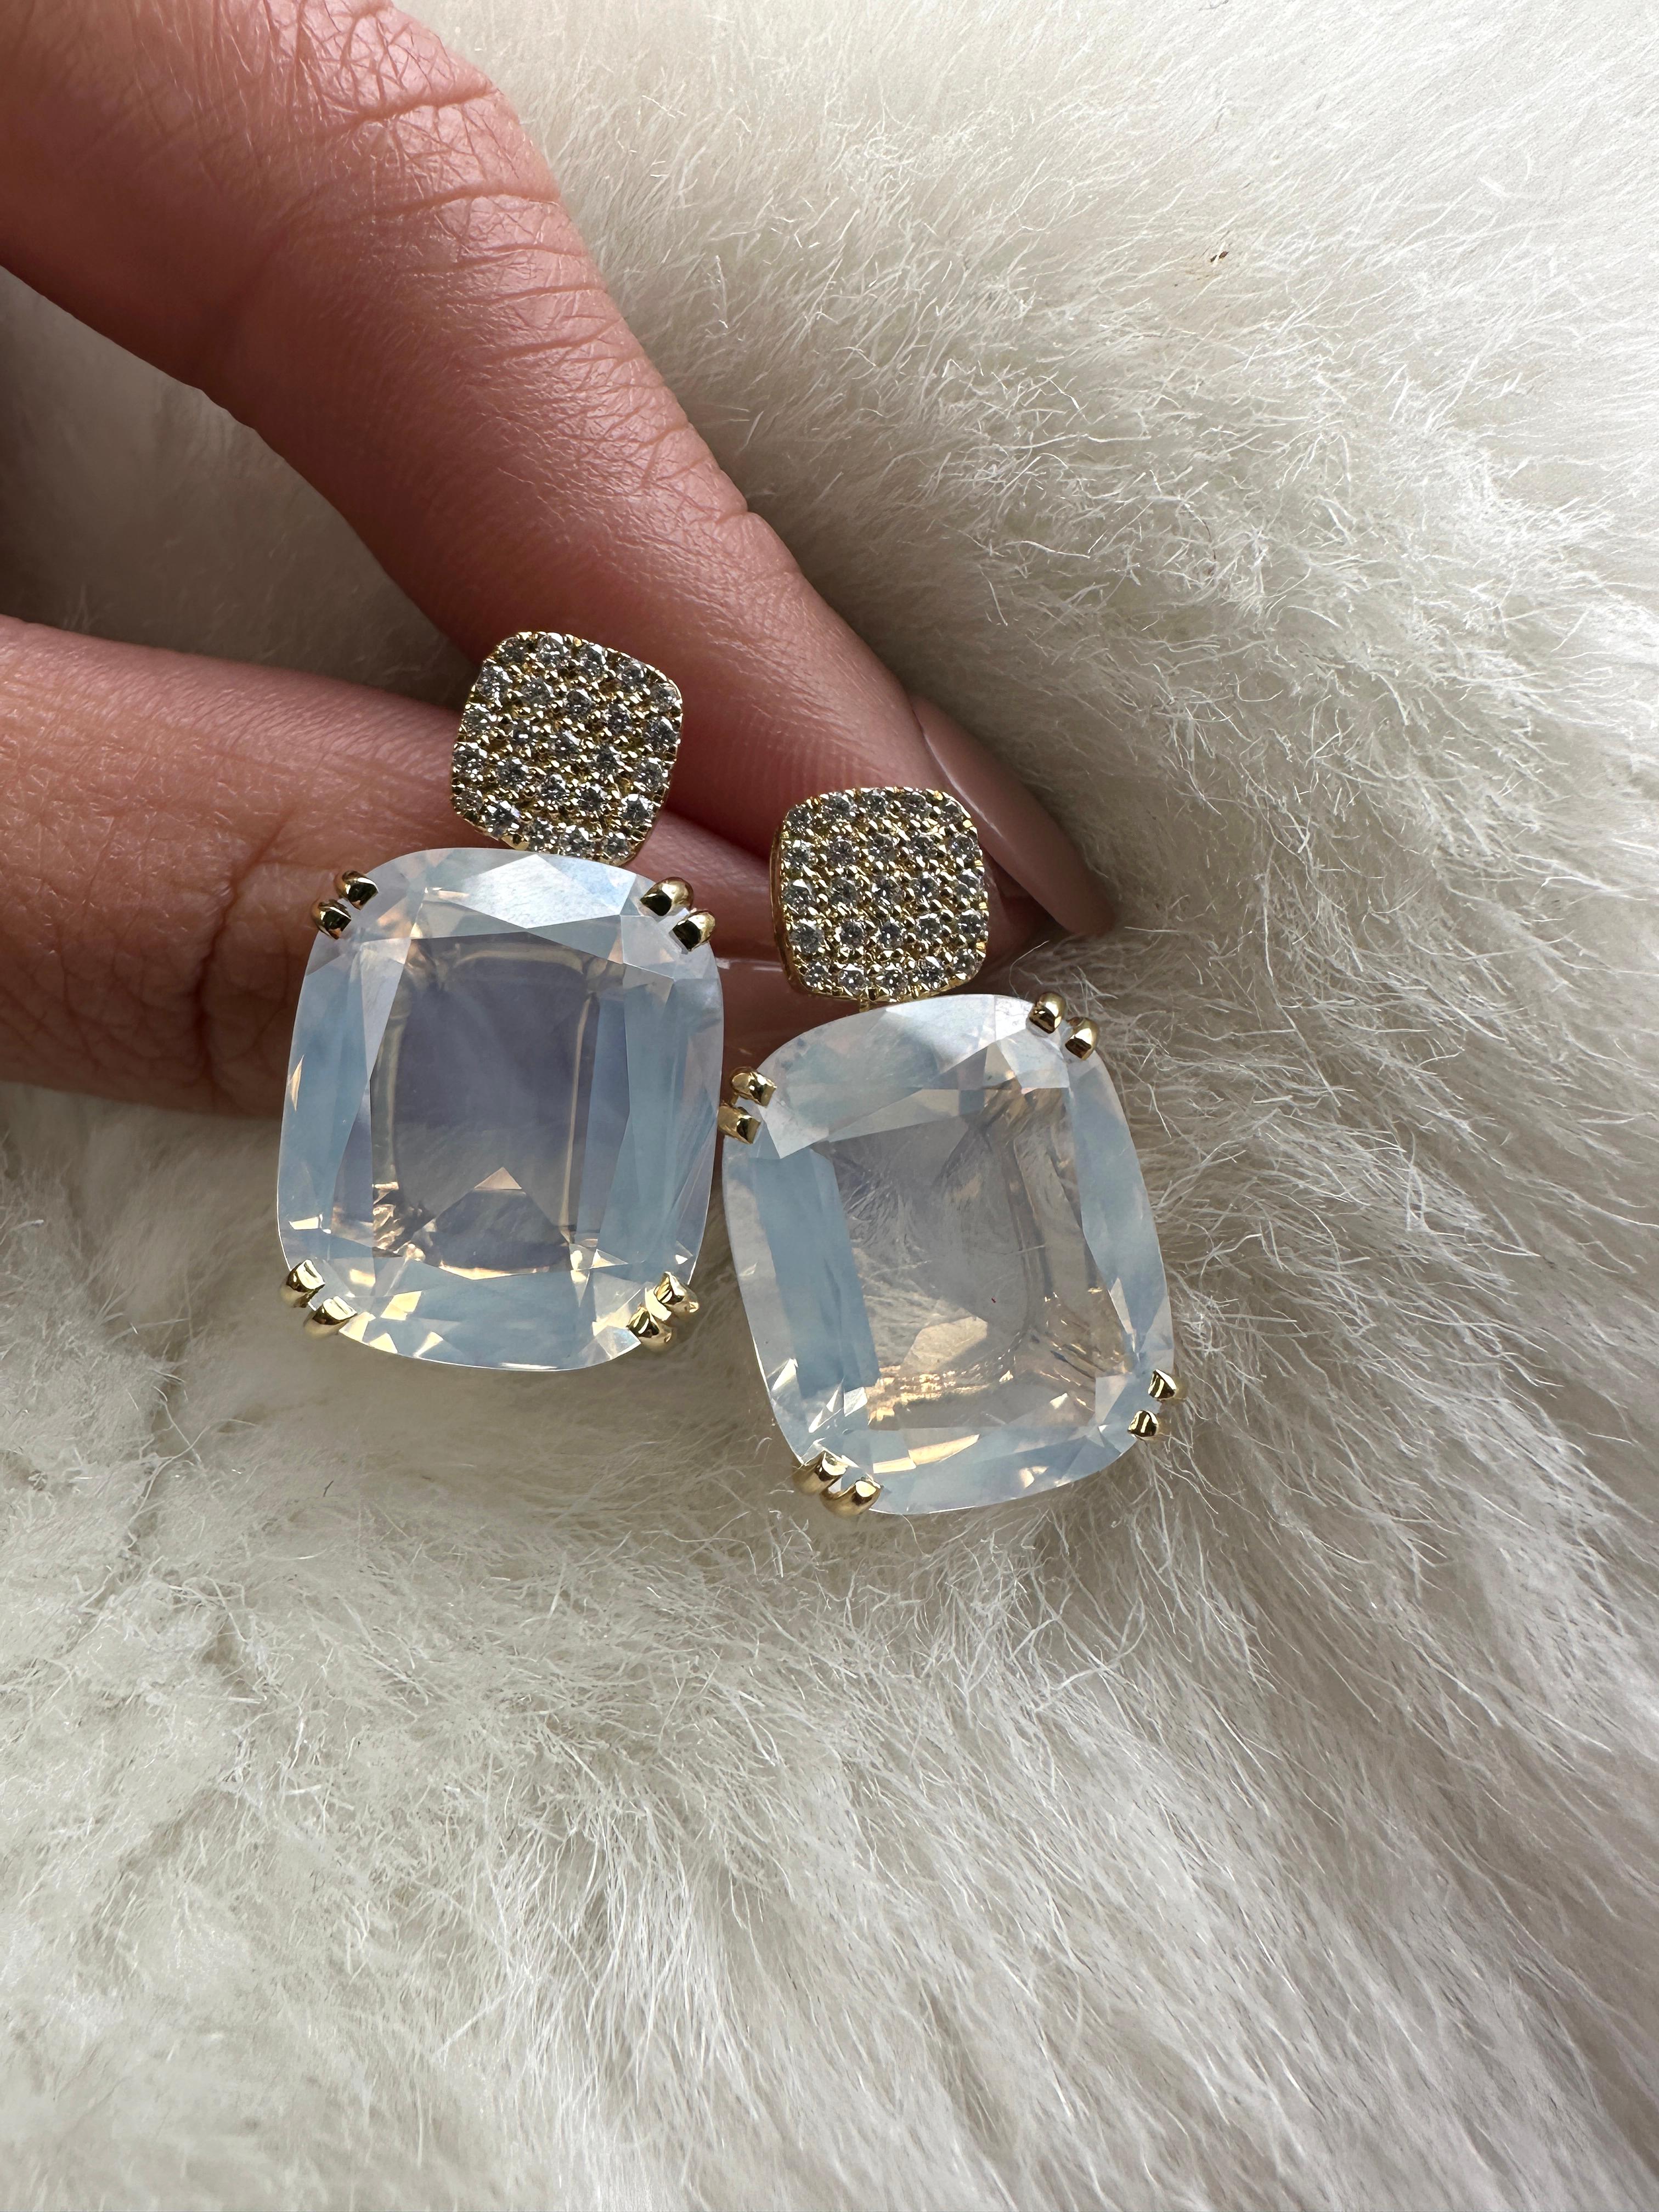 Introducing the stunning Moon Quartz Cushion & Diamonds Earrings from our popular 'Gossip' Collection. 
The focal point of these earrings is the mesmerizing moon quartz cushion-cut gemstone. The cushion-cut shape adds a touch of vintage charm, while